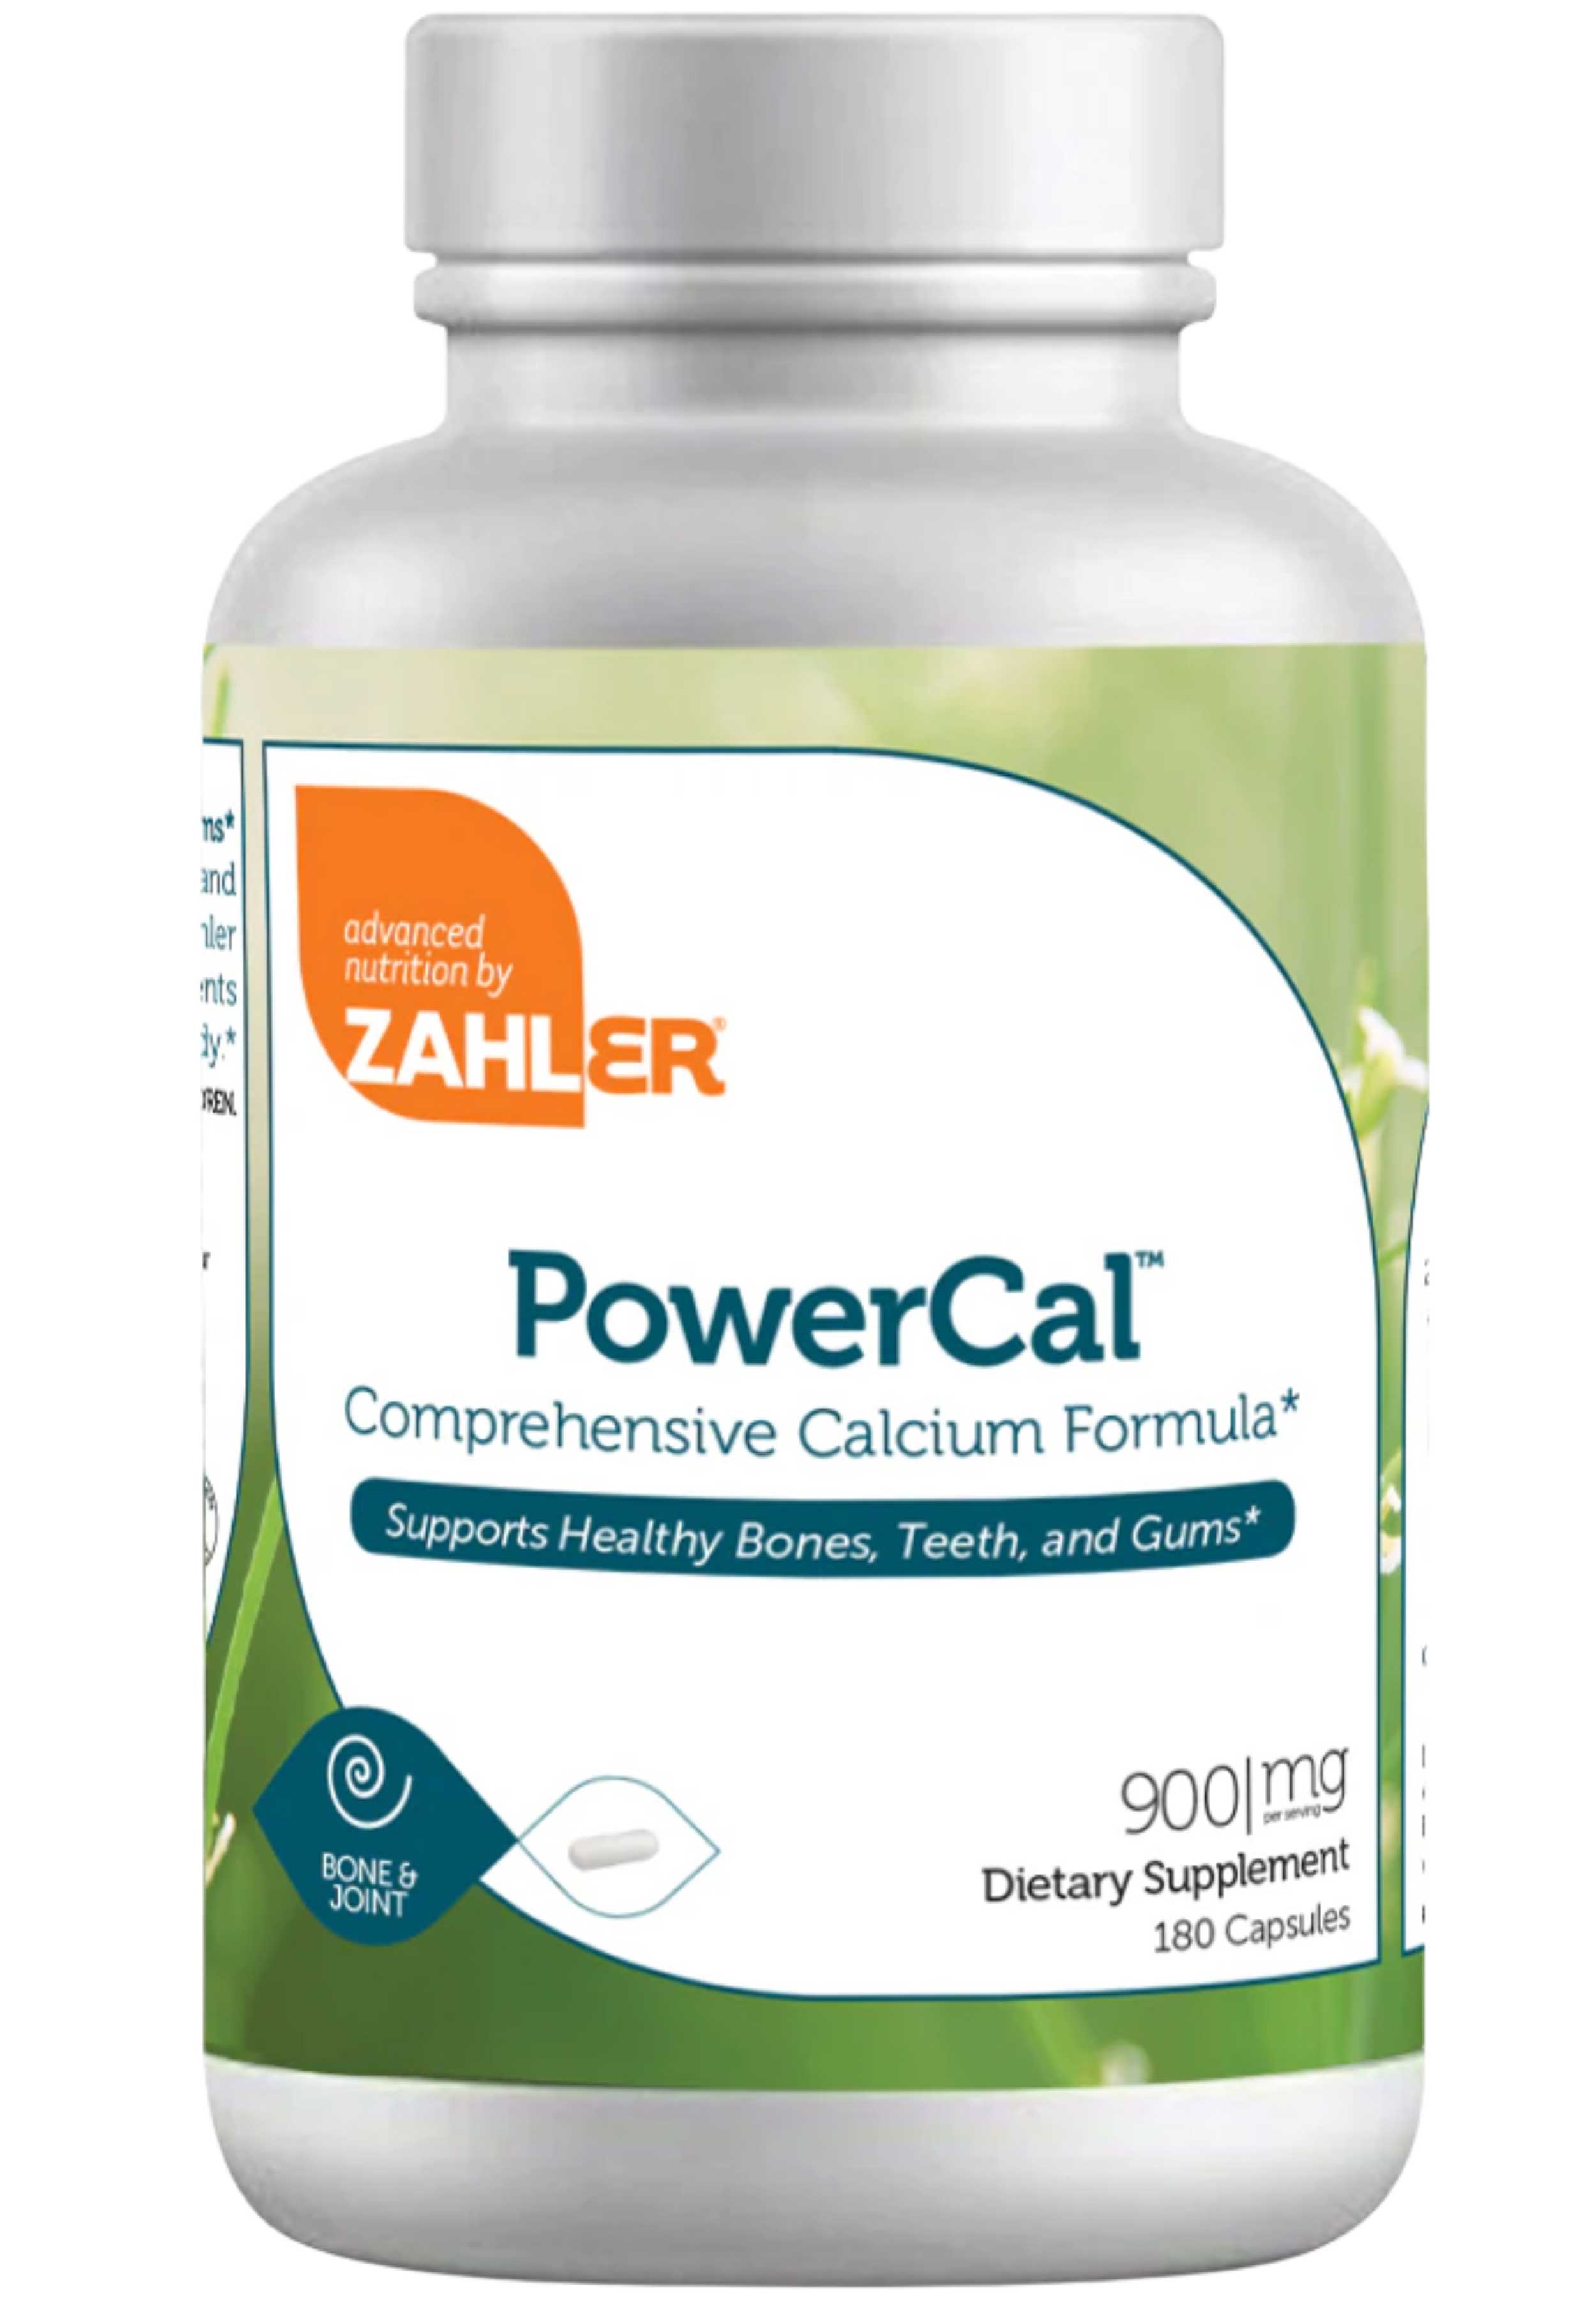 Advanced Nutrition By Zahler PowerCal Capsules